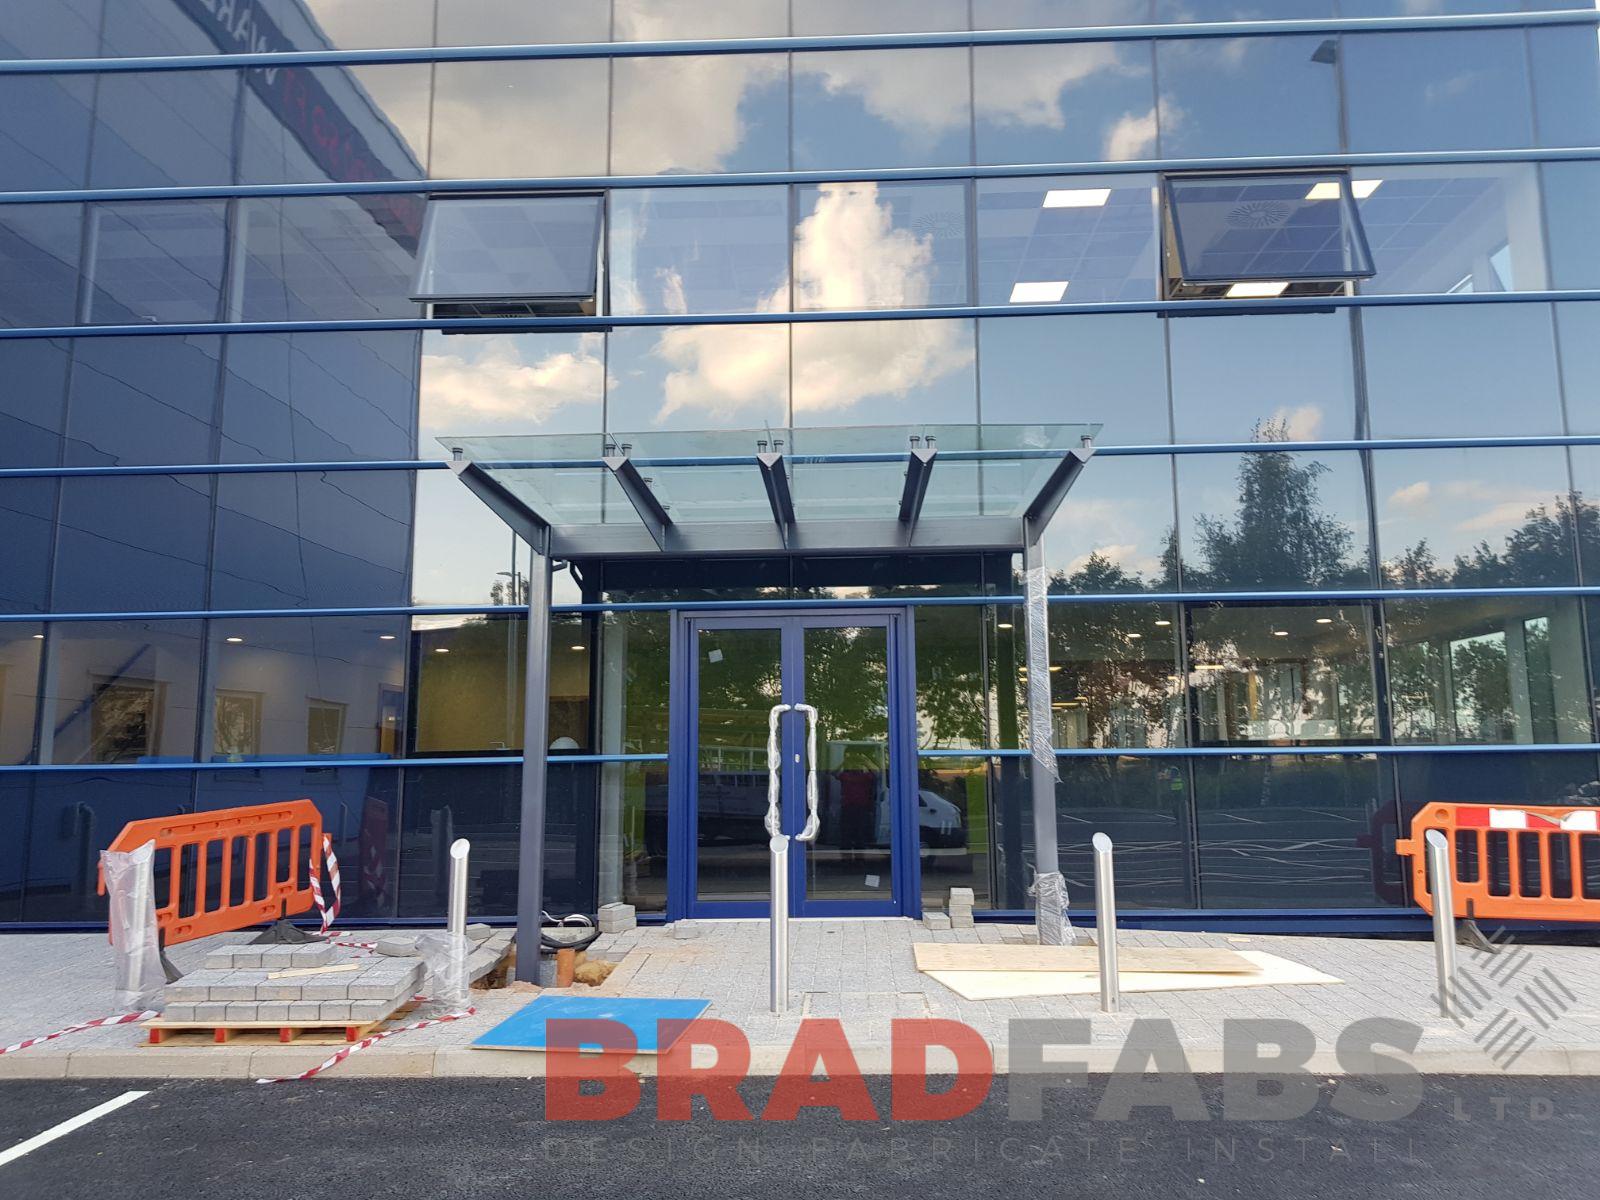 Bradfabs designed and manufactured this large entrance canopy in Hertfordshire